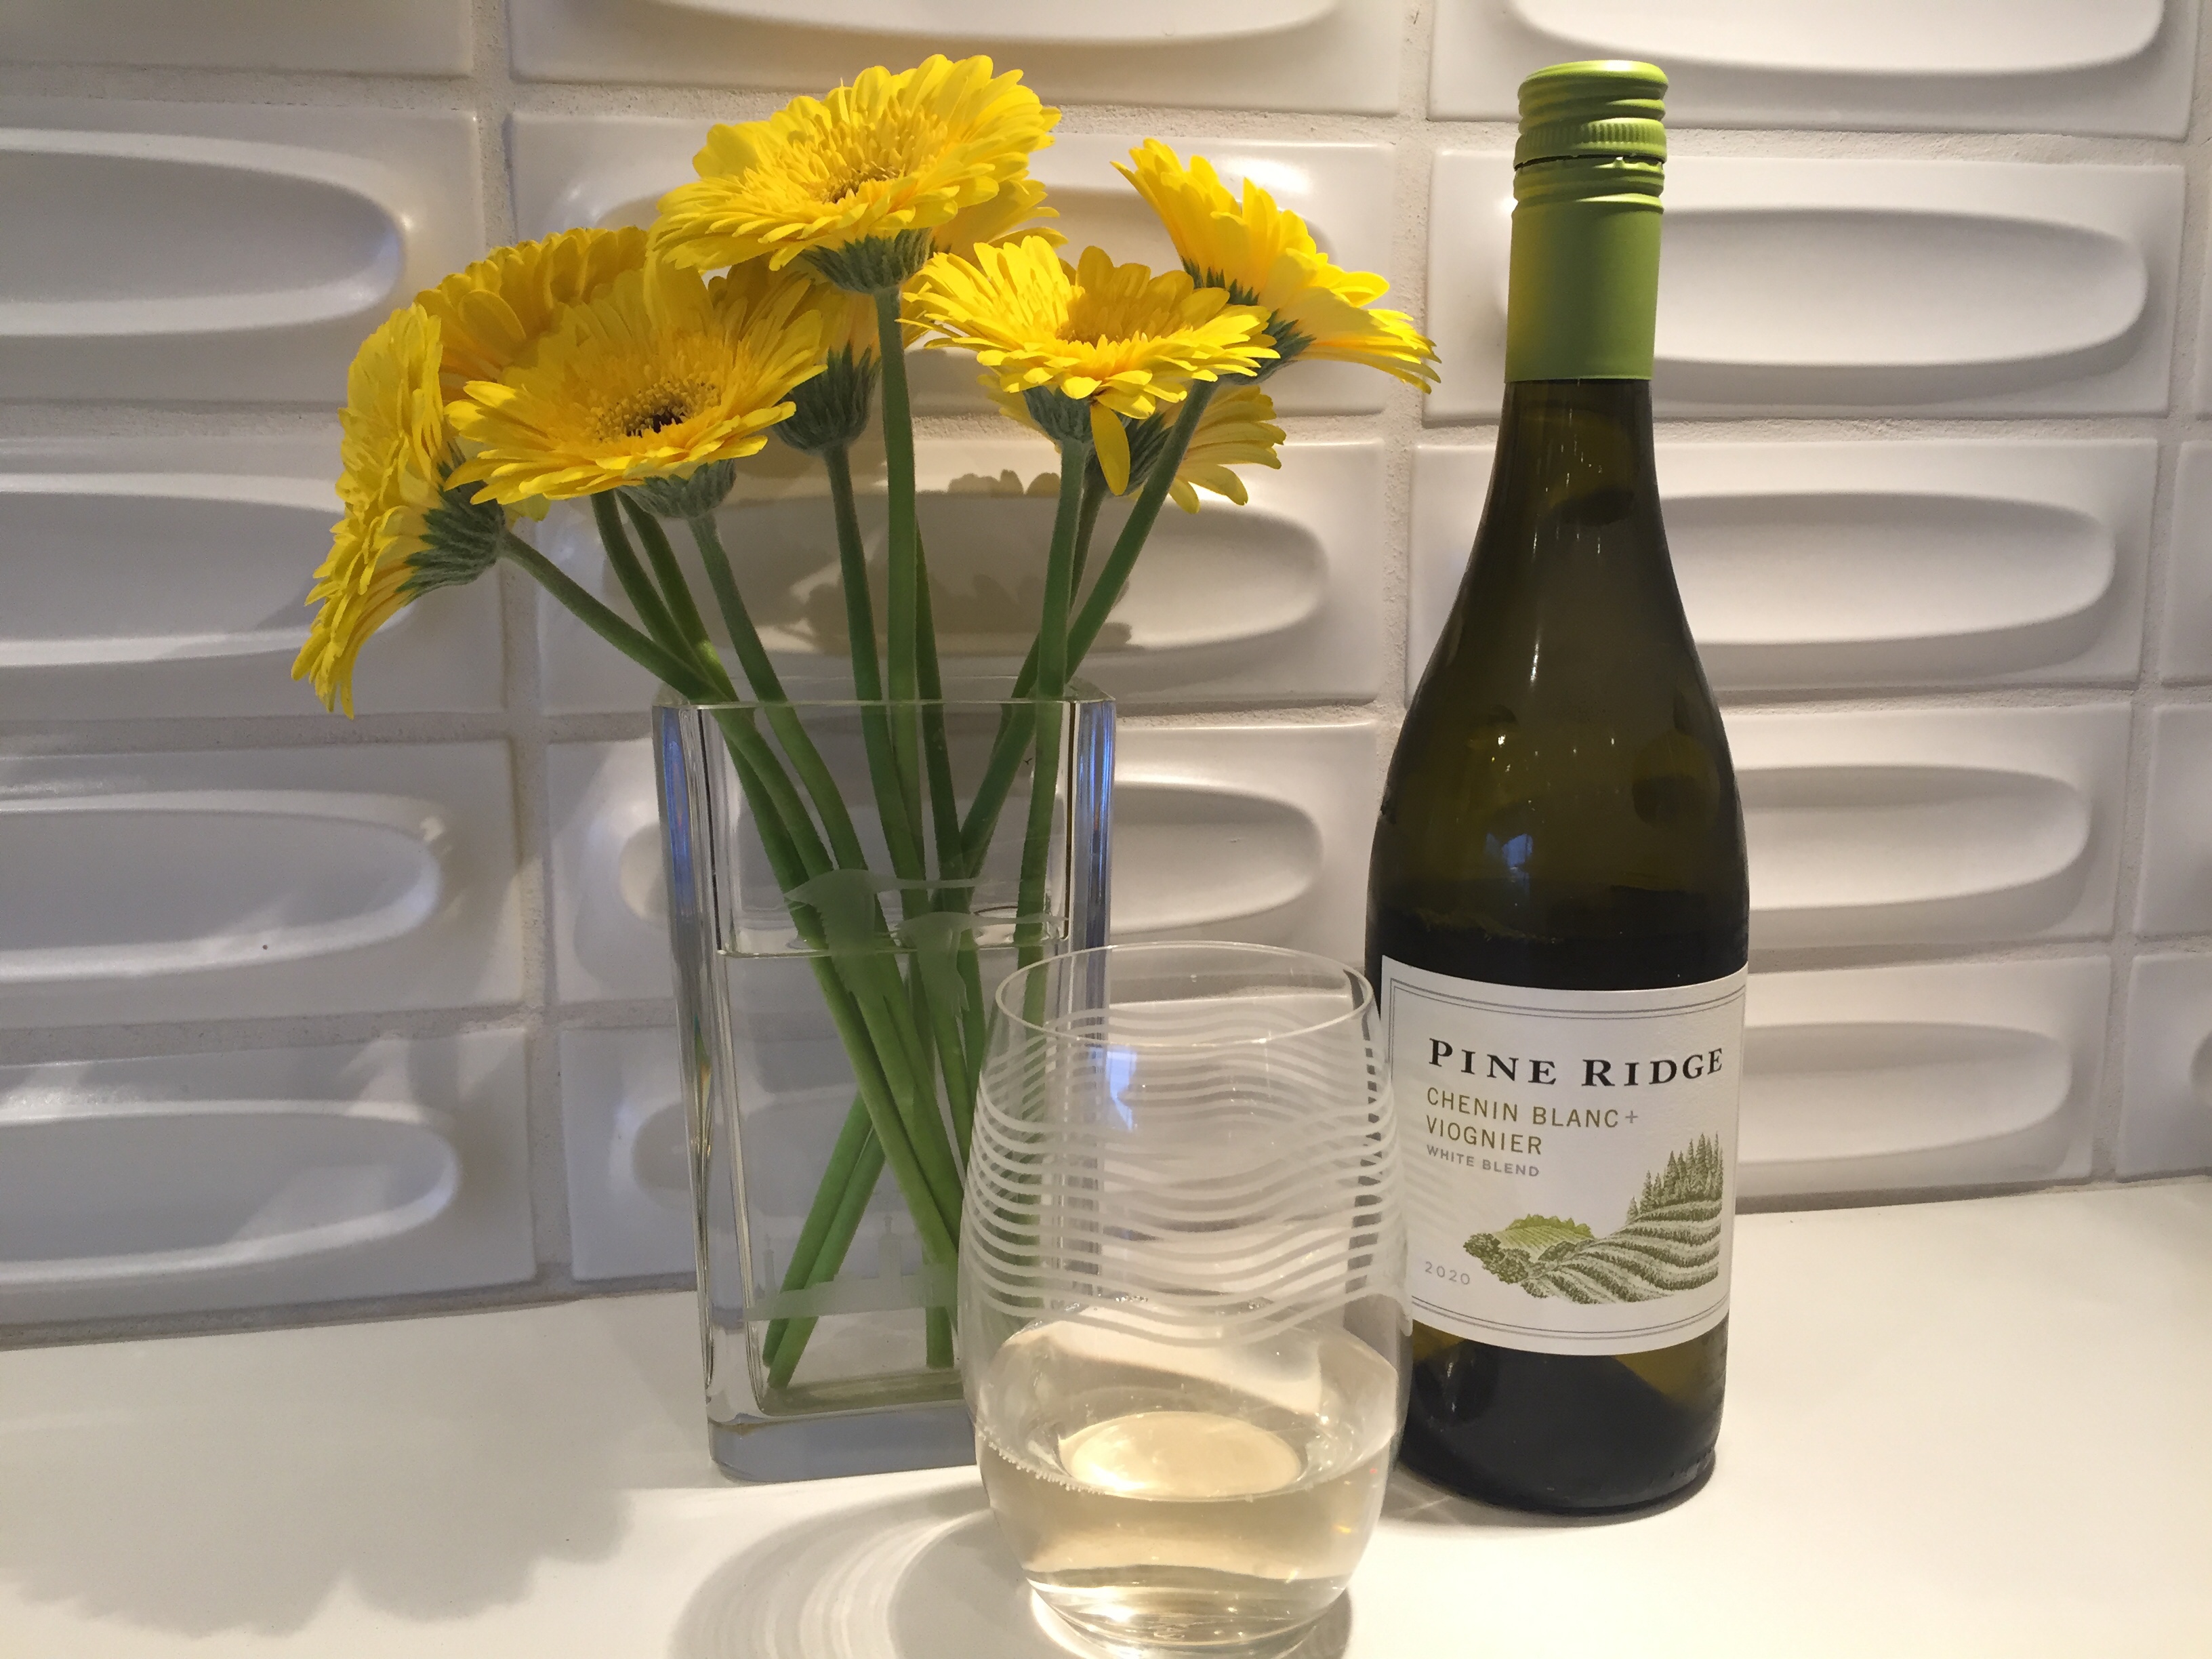 Bottle and glass of Pine Ridge 2020 Chenin Blanc + Viognier - and a vase of yellow Gerberra Daisies